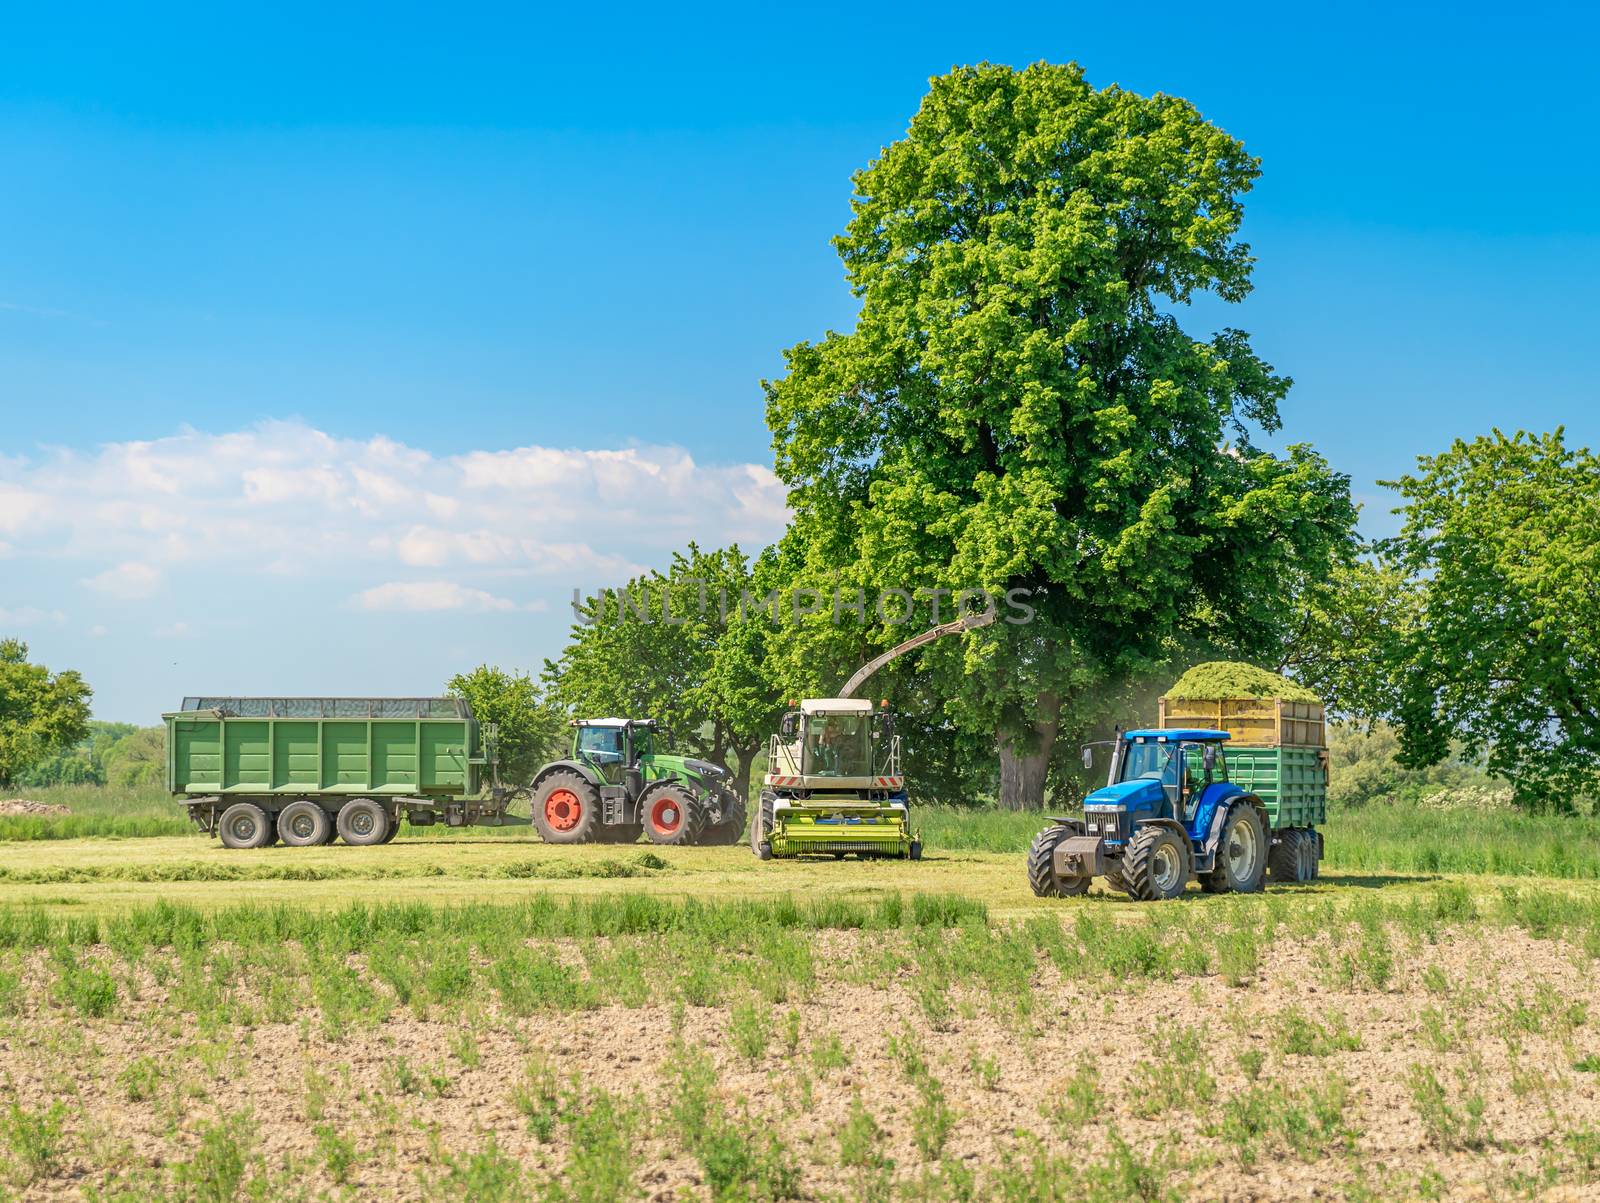 harvesting hay from the field with the help of a combine harvester and a tractor.